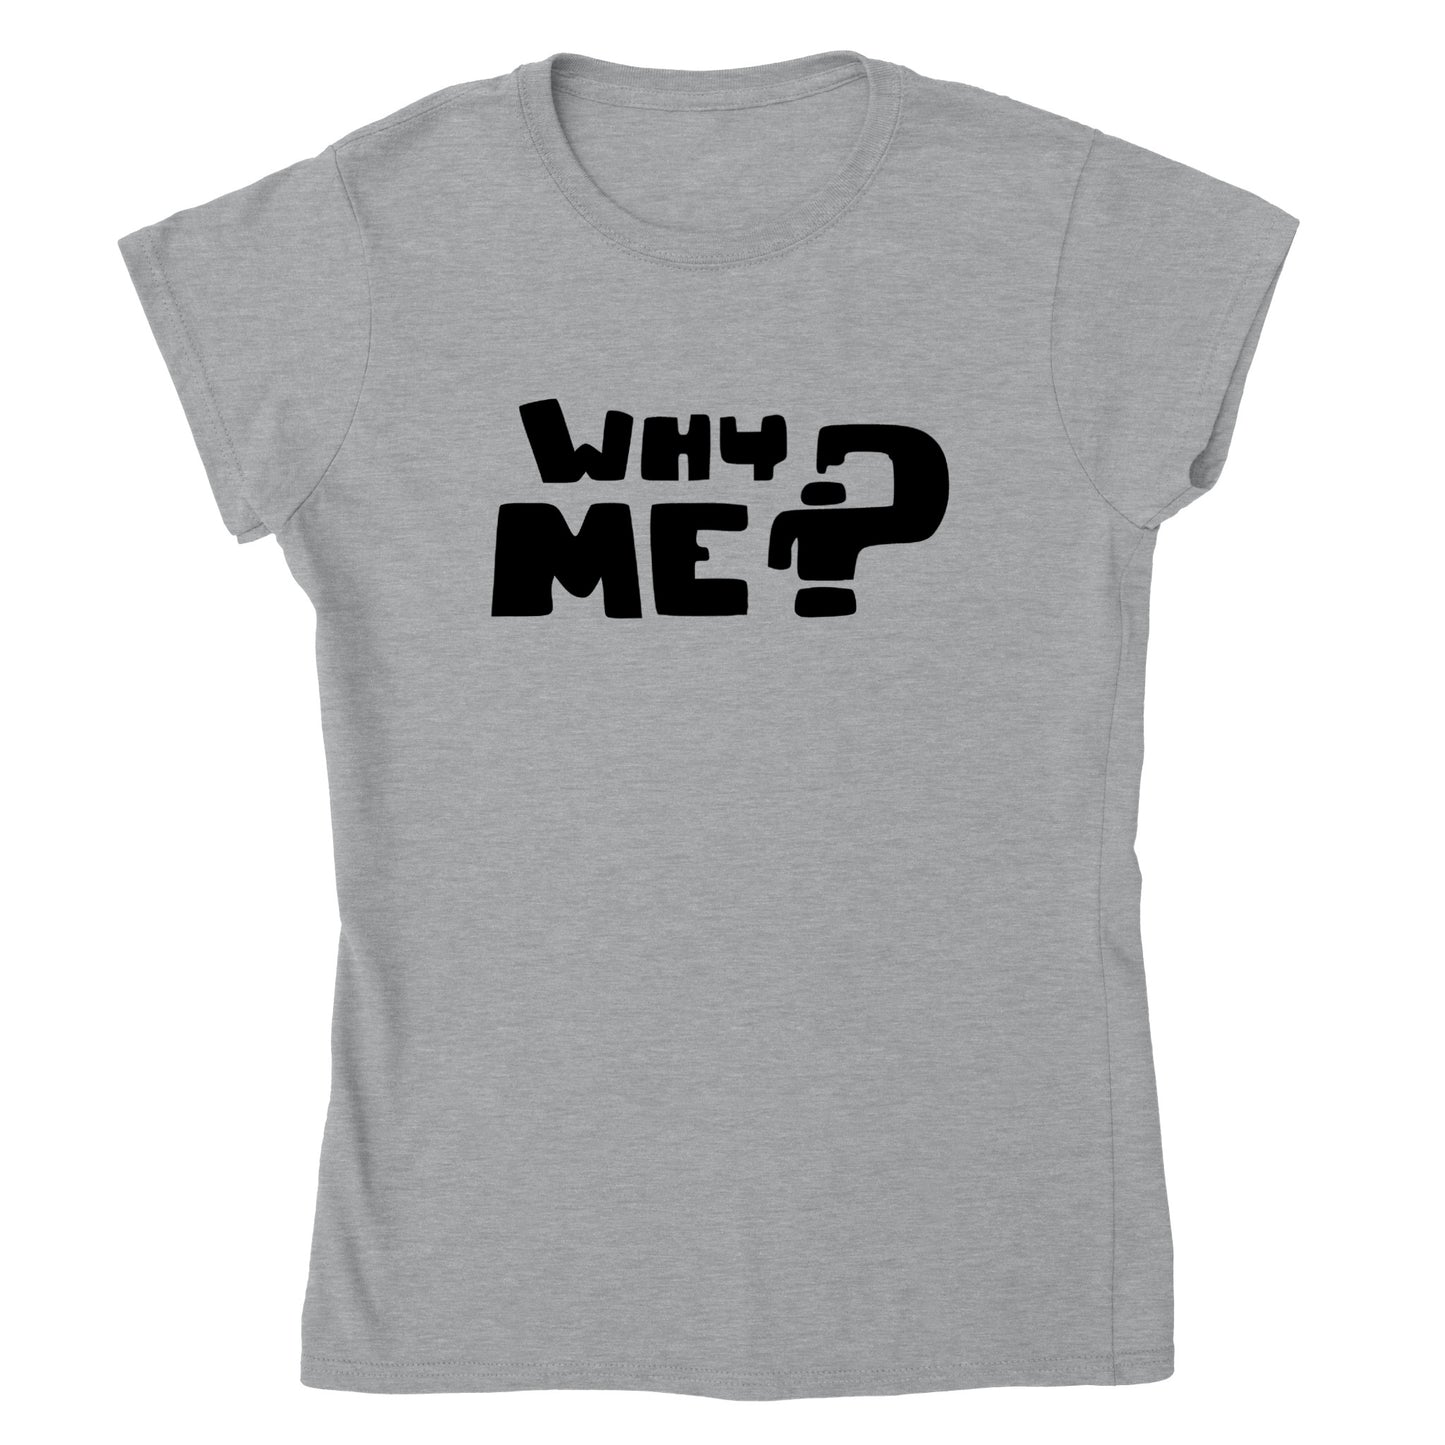 Why Me? - Classic Womens Crewneck T-shirt - Mister Snarky's